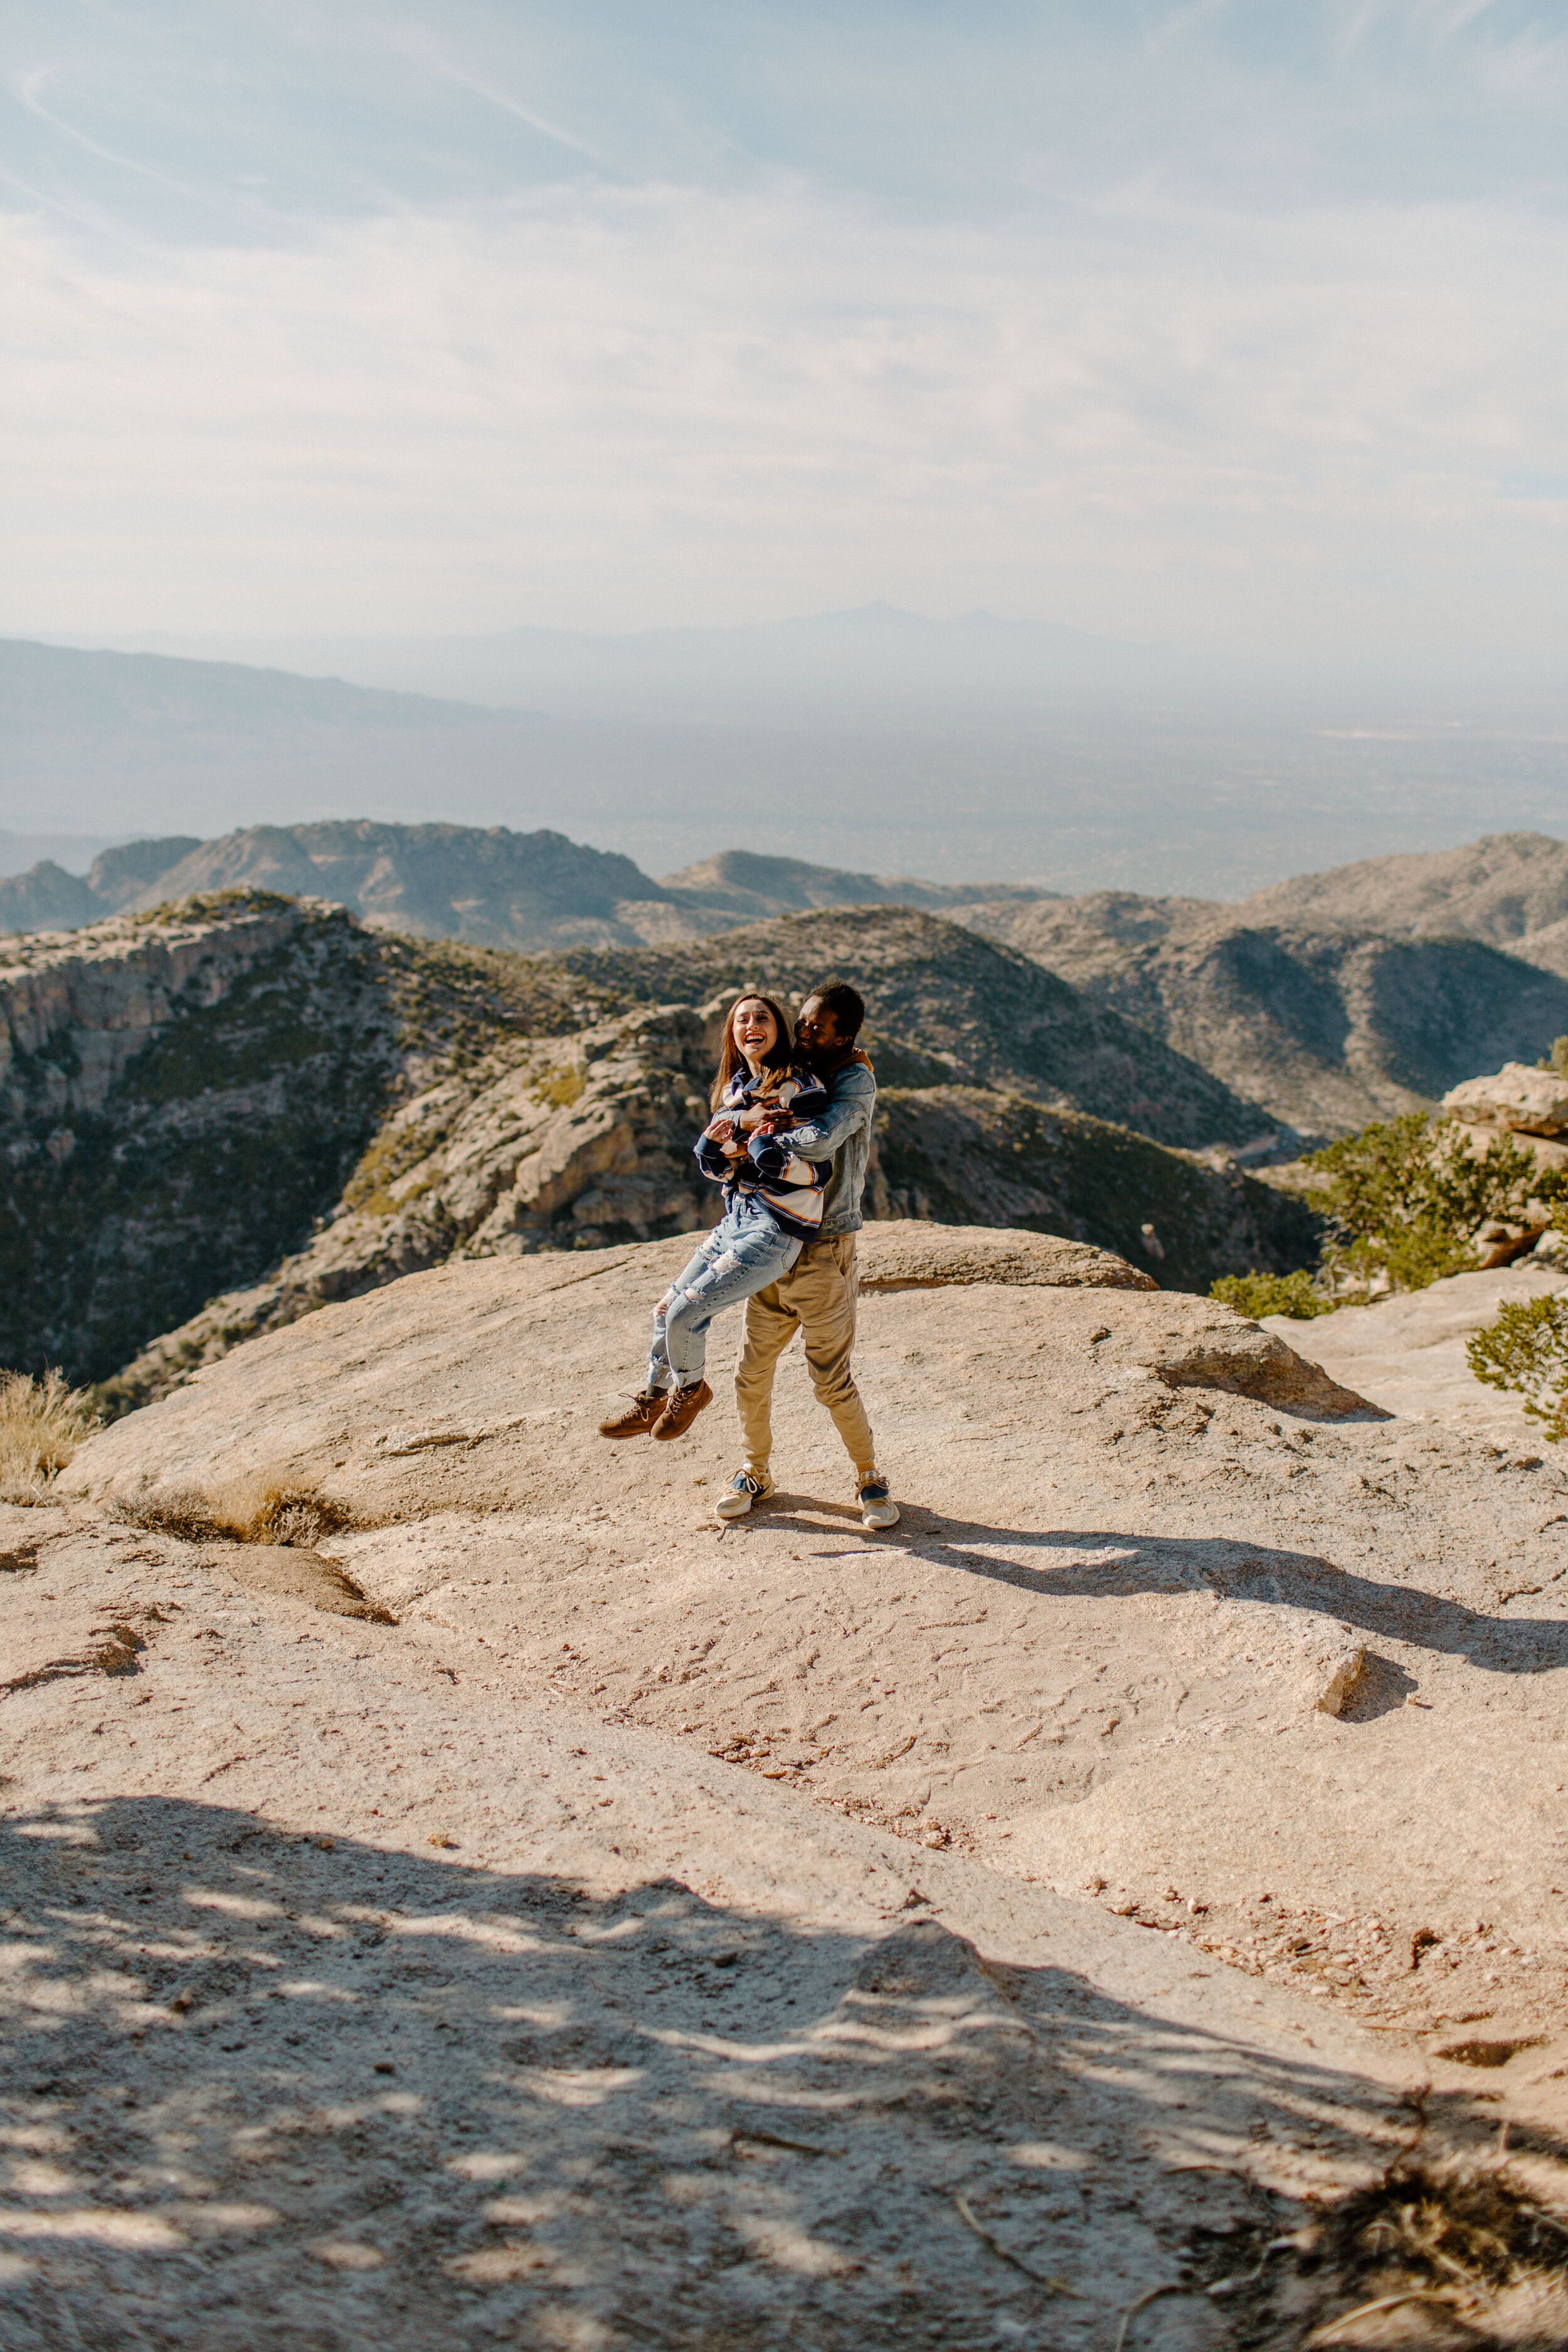  Boyfriend picks up his girlfriend and twirls her around and they both laugh at Windy Point on Mount Lemmon in Tucson Arizona. Arizona couples photographer, Lucy B. Photography. 